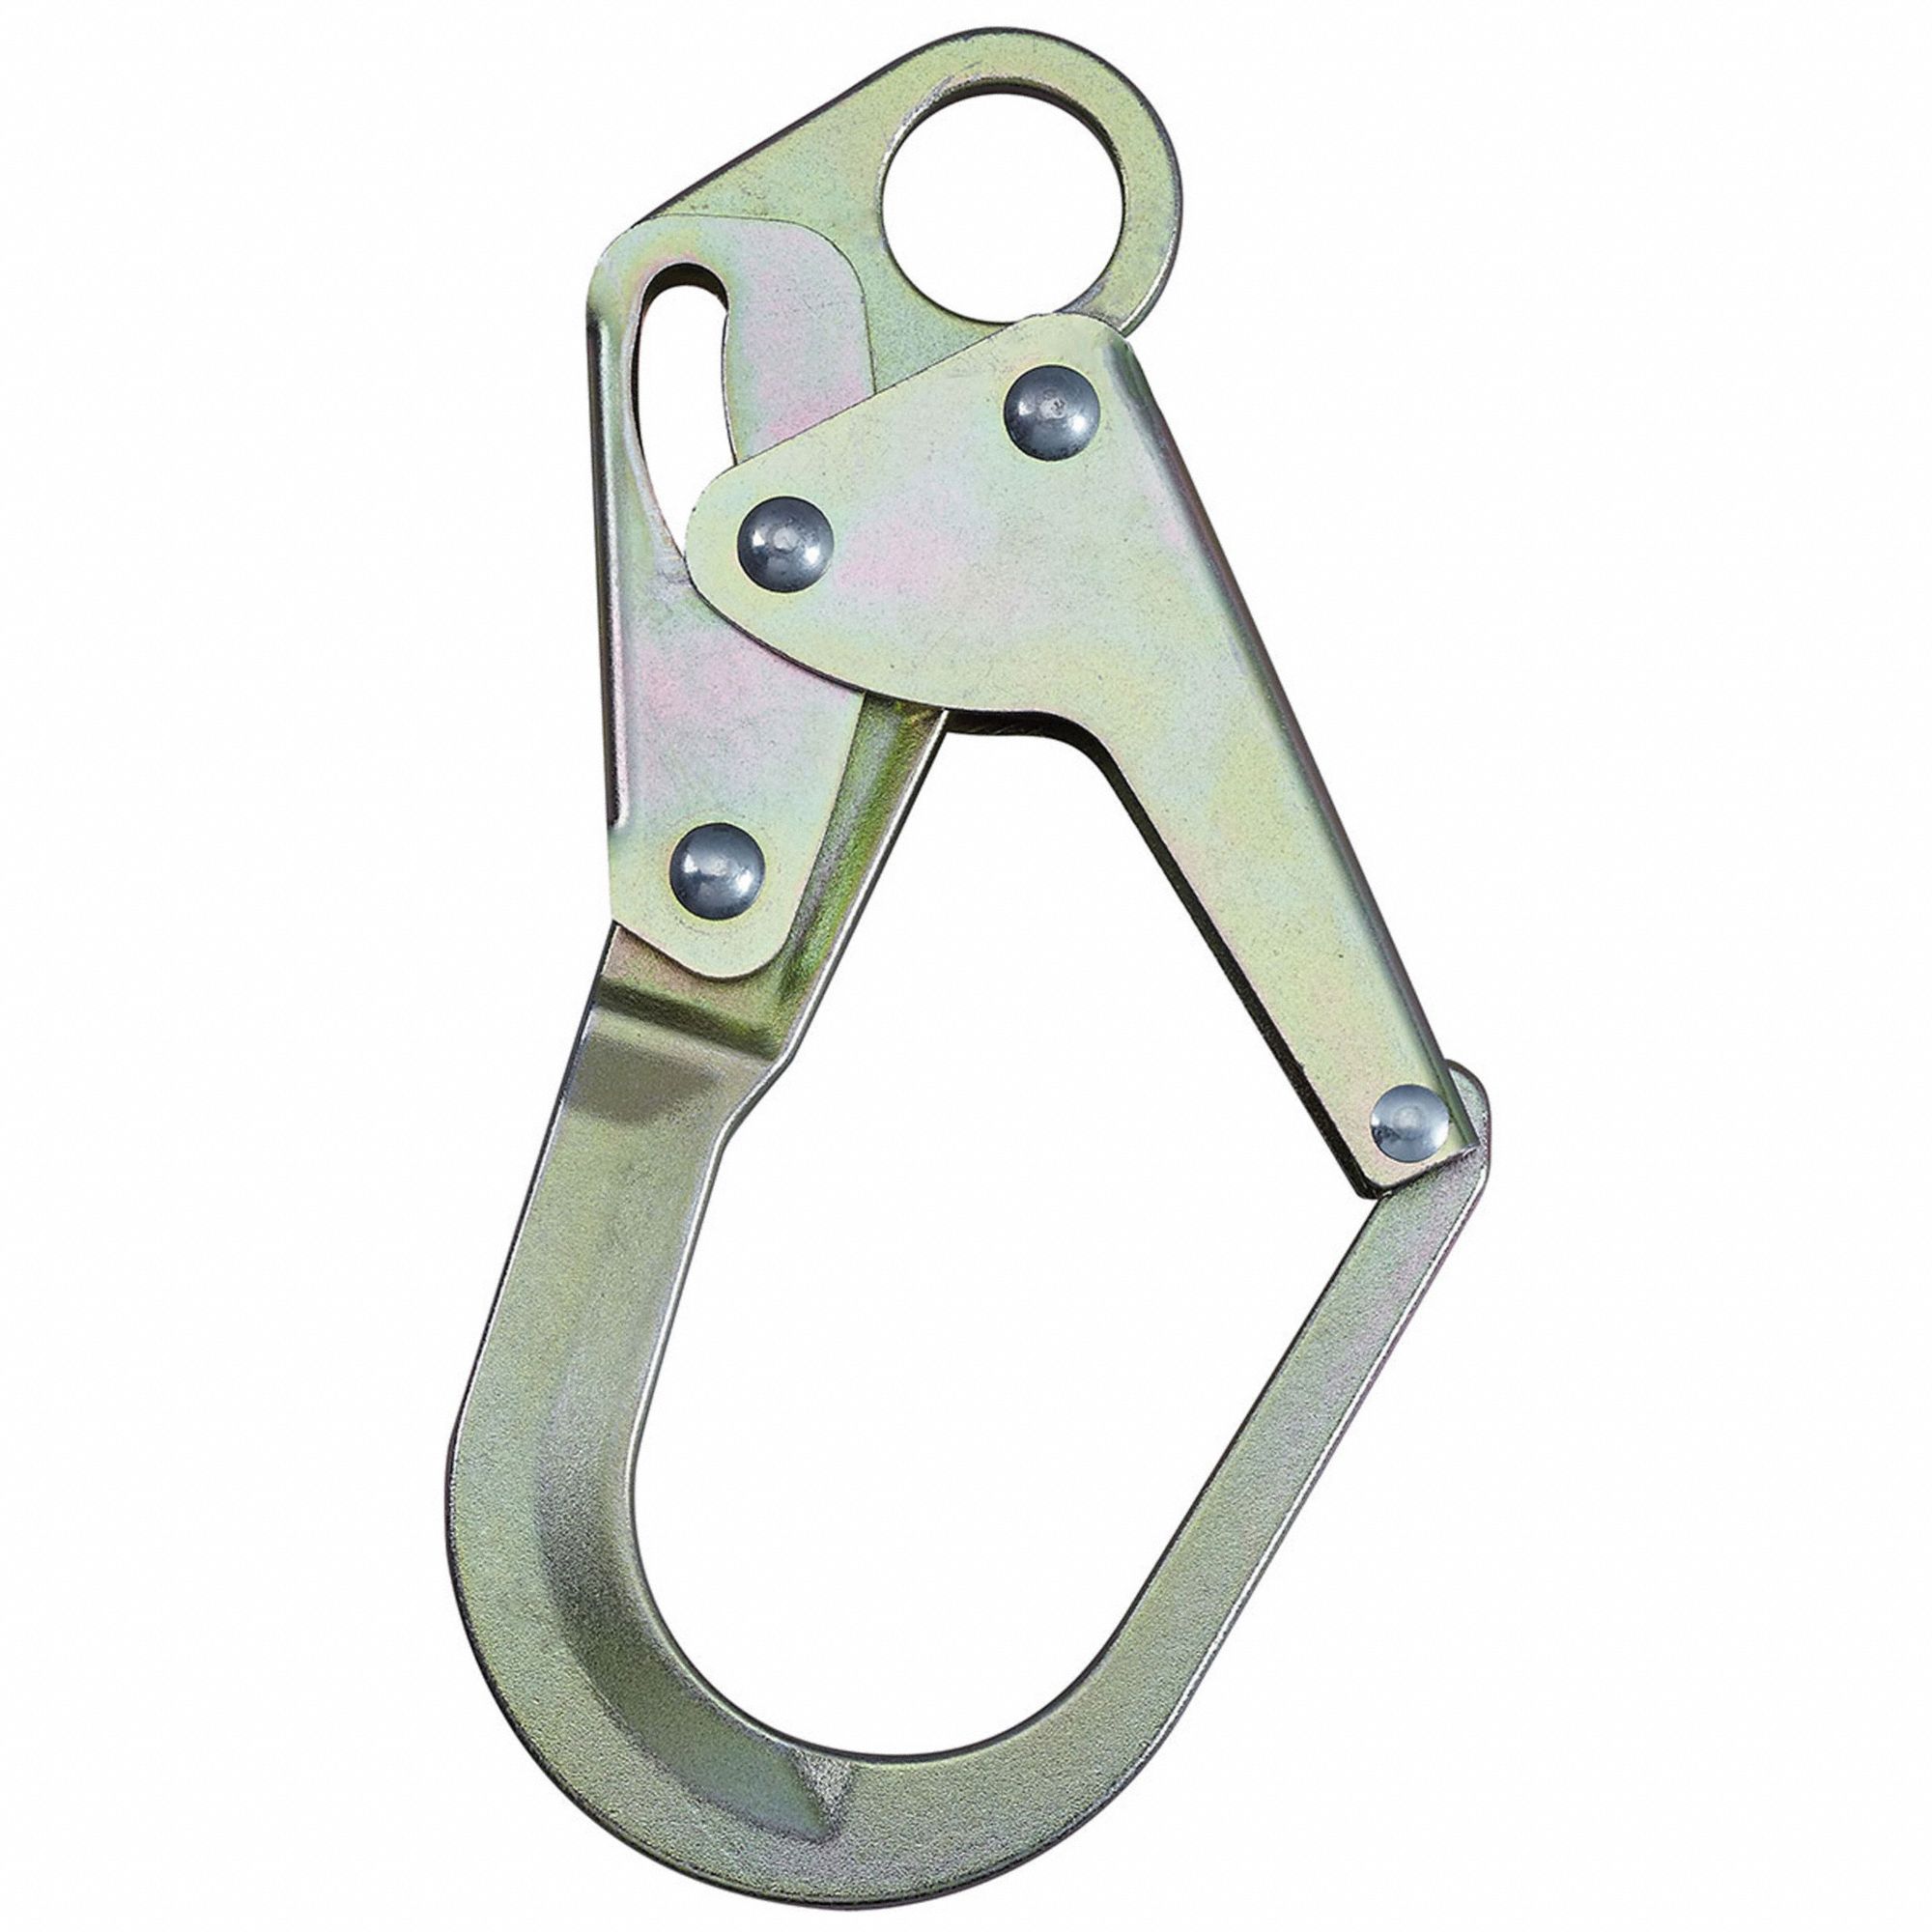 REBAR HOOK, DOUBLE LOCKING, MAX LOAD 5000 LBS, 3/4 IN OPENING, FORGED STEEL